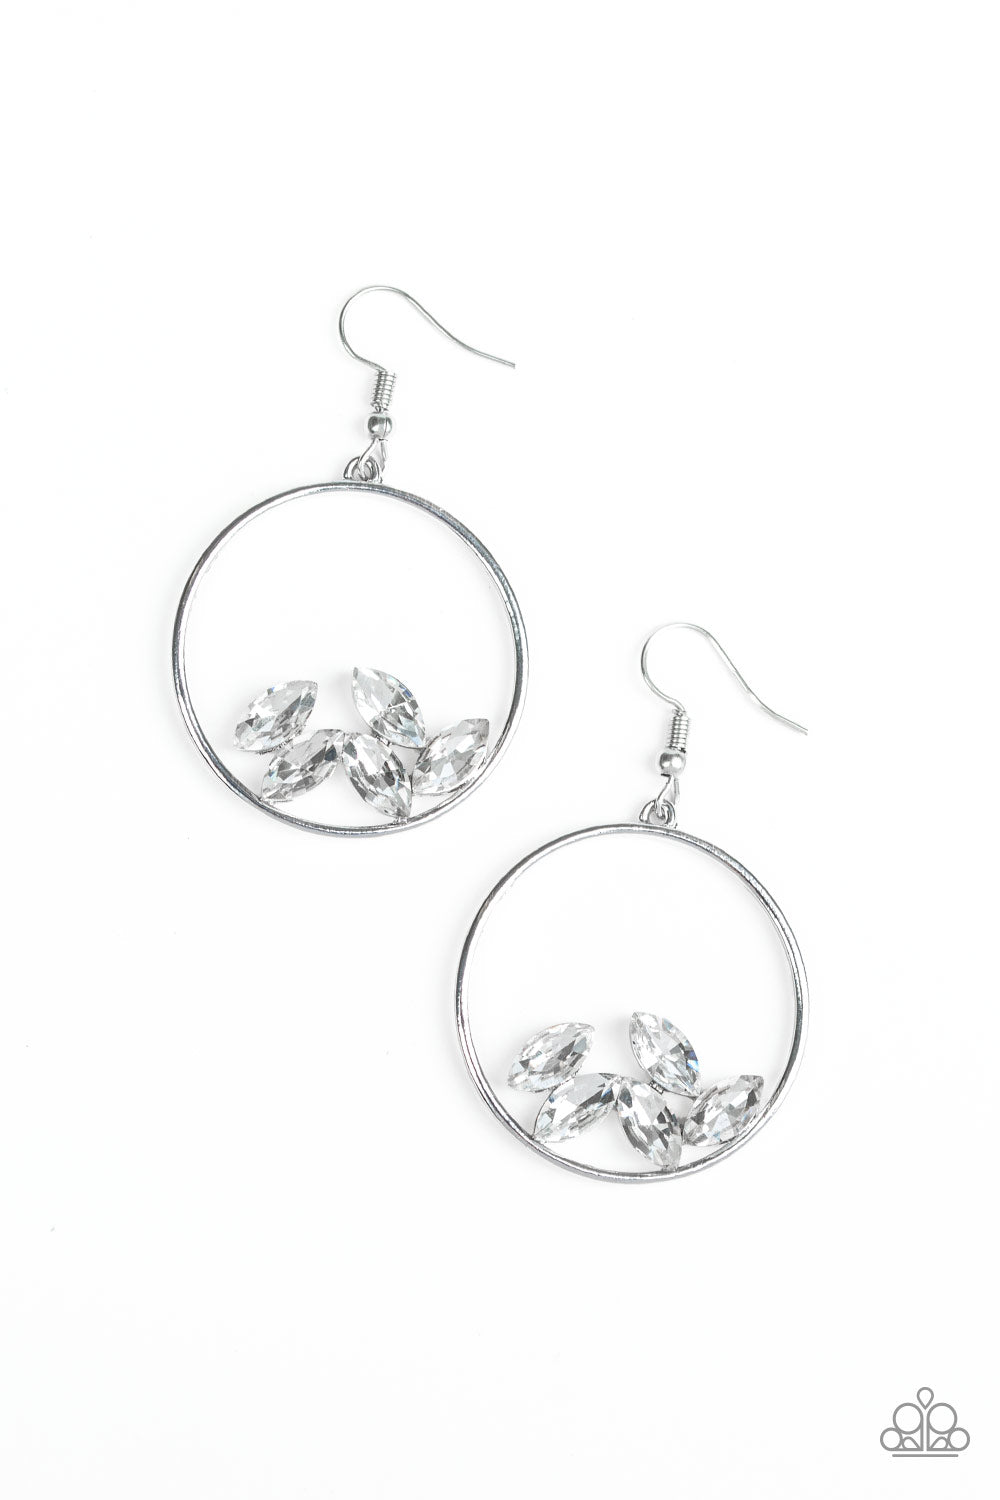 Cue The Confetti White Earring - Paparazzi Accessories  Glittery white marquise-cut rhinestones collect at the bottom of an airy silver hoop for a glamorous look. Earring attaches to a standard fishhook fitting.  All Paparazzi Accessories are lead free and nickel free!  Sold as one pair of earrings.